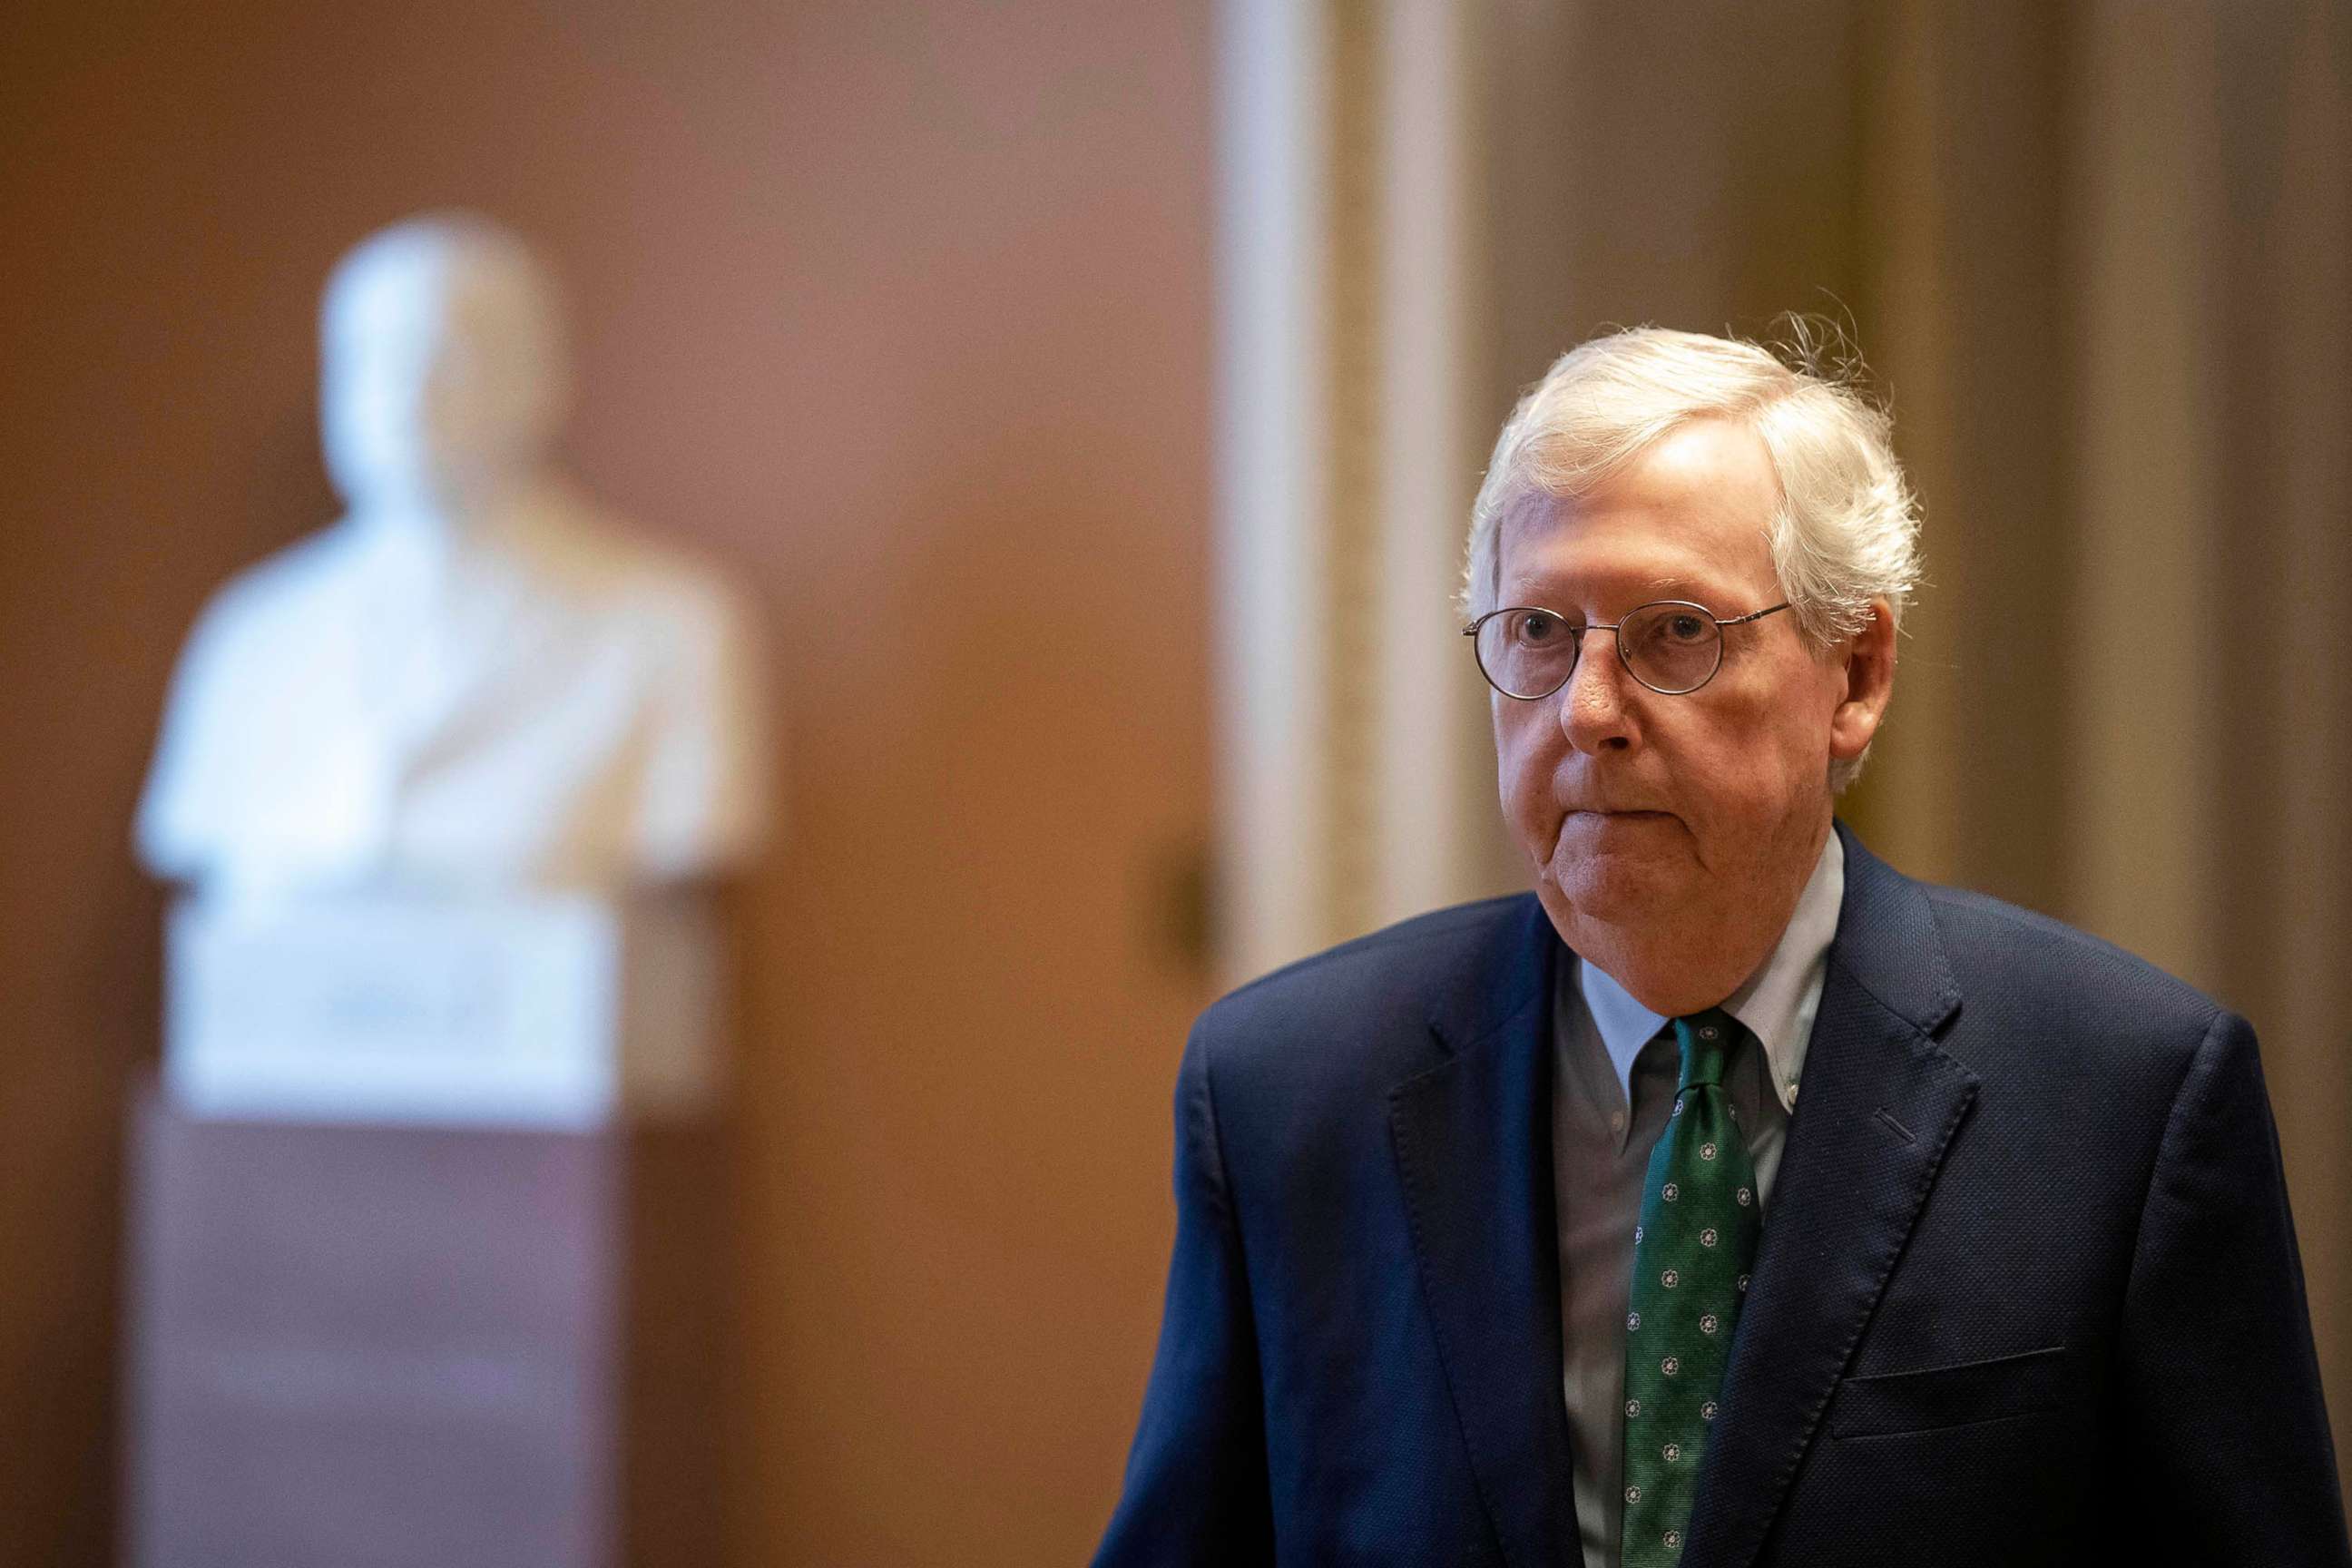 PHOTO: Senate Minority Leader Sen. Mitch McConnell walks to his office as he arrives at the U.S. Capitol, Nov. 28, 2022 in Washington, DC.